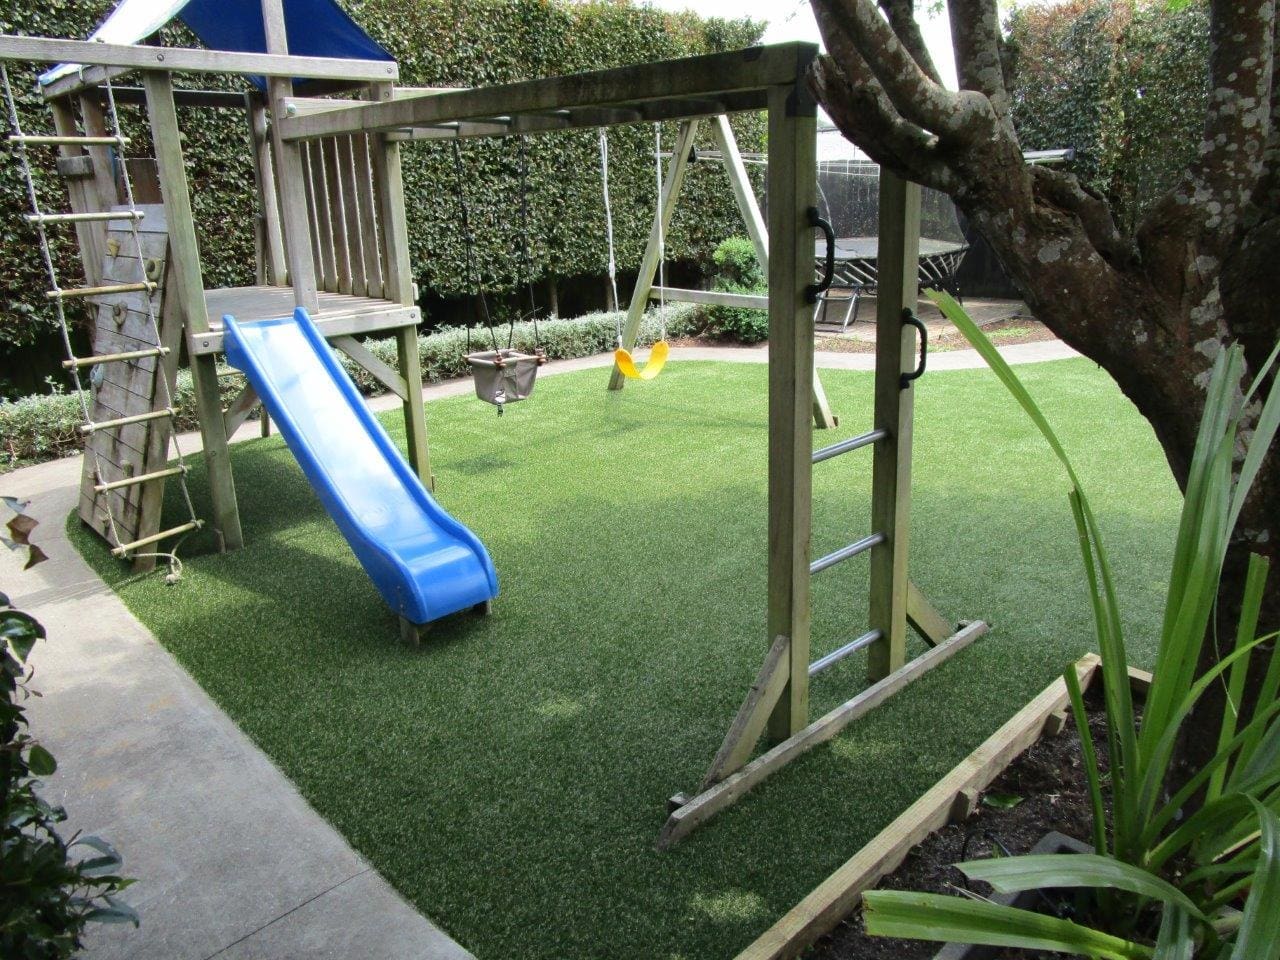 Fake grass used in a Playground